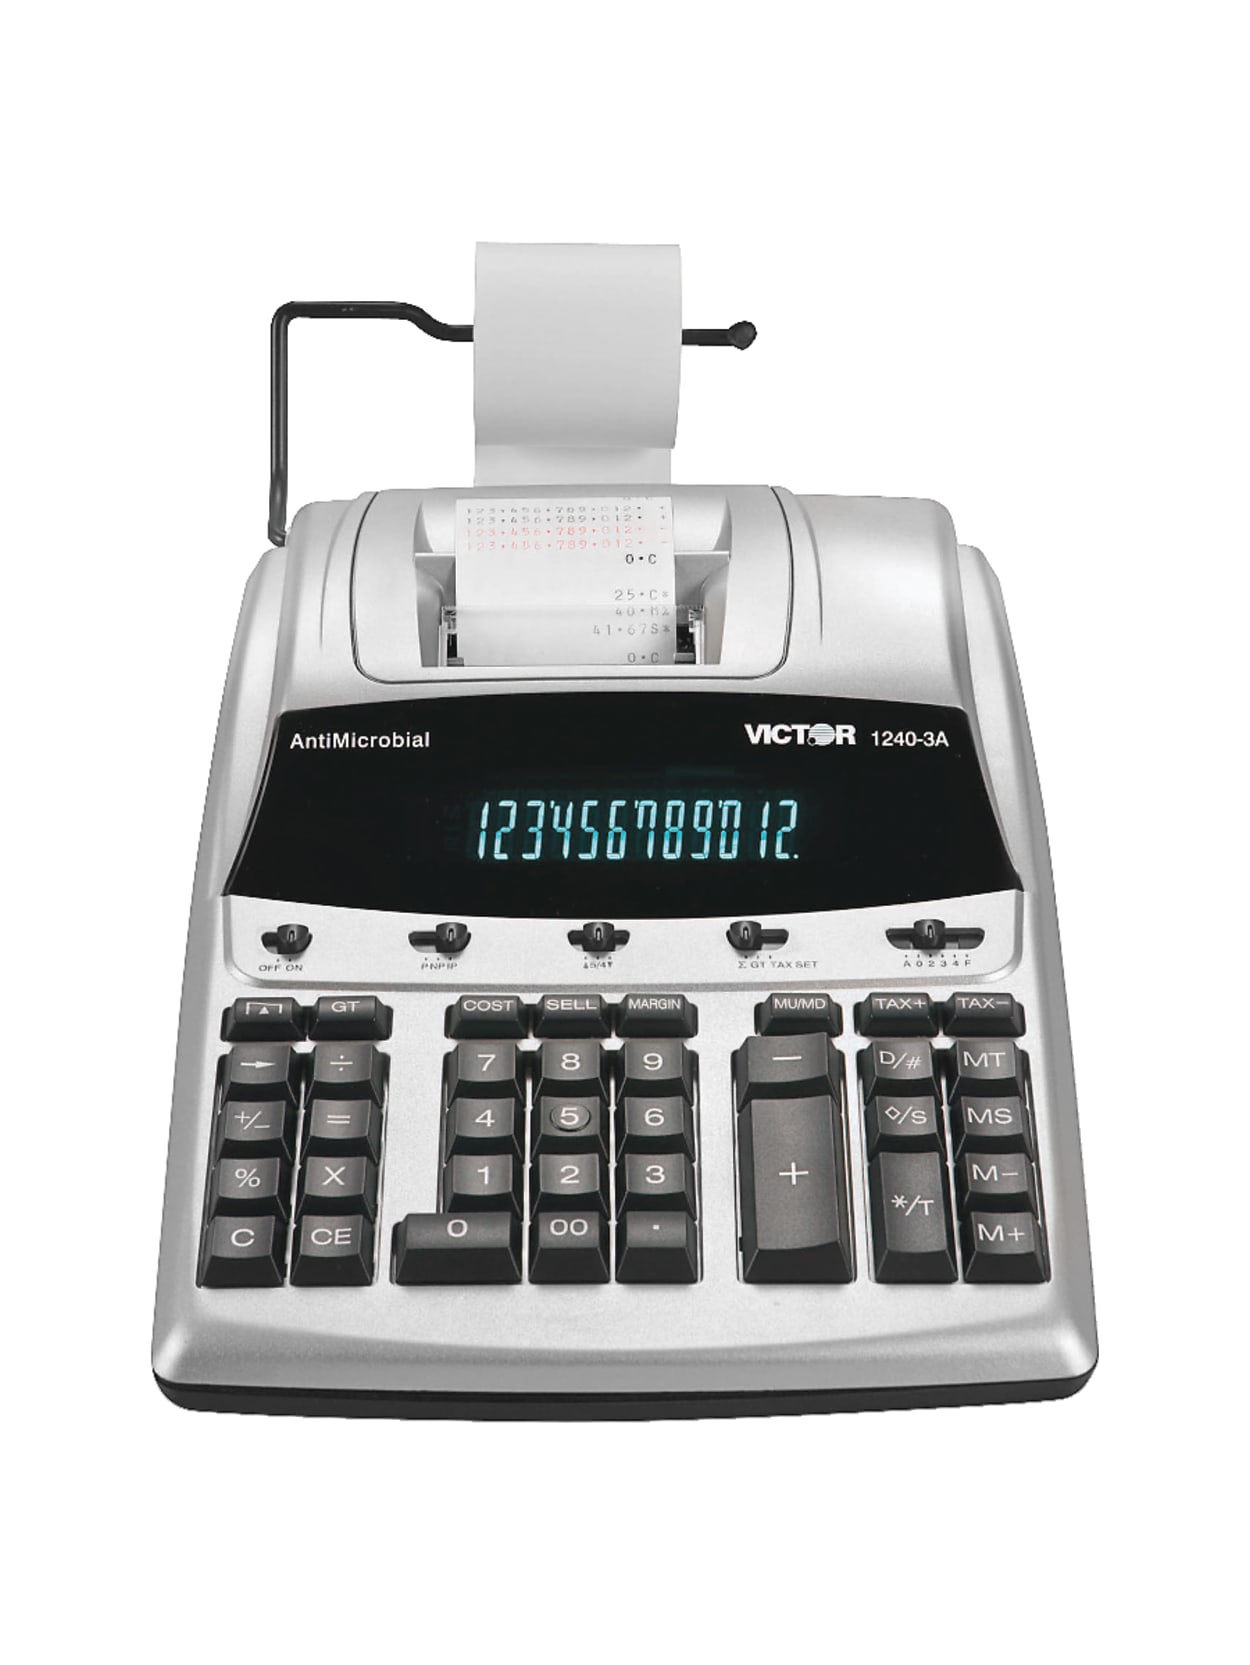 Victor 1240 3a 12 Digit Heavy Duty Commercial Printing Calculator